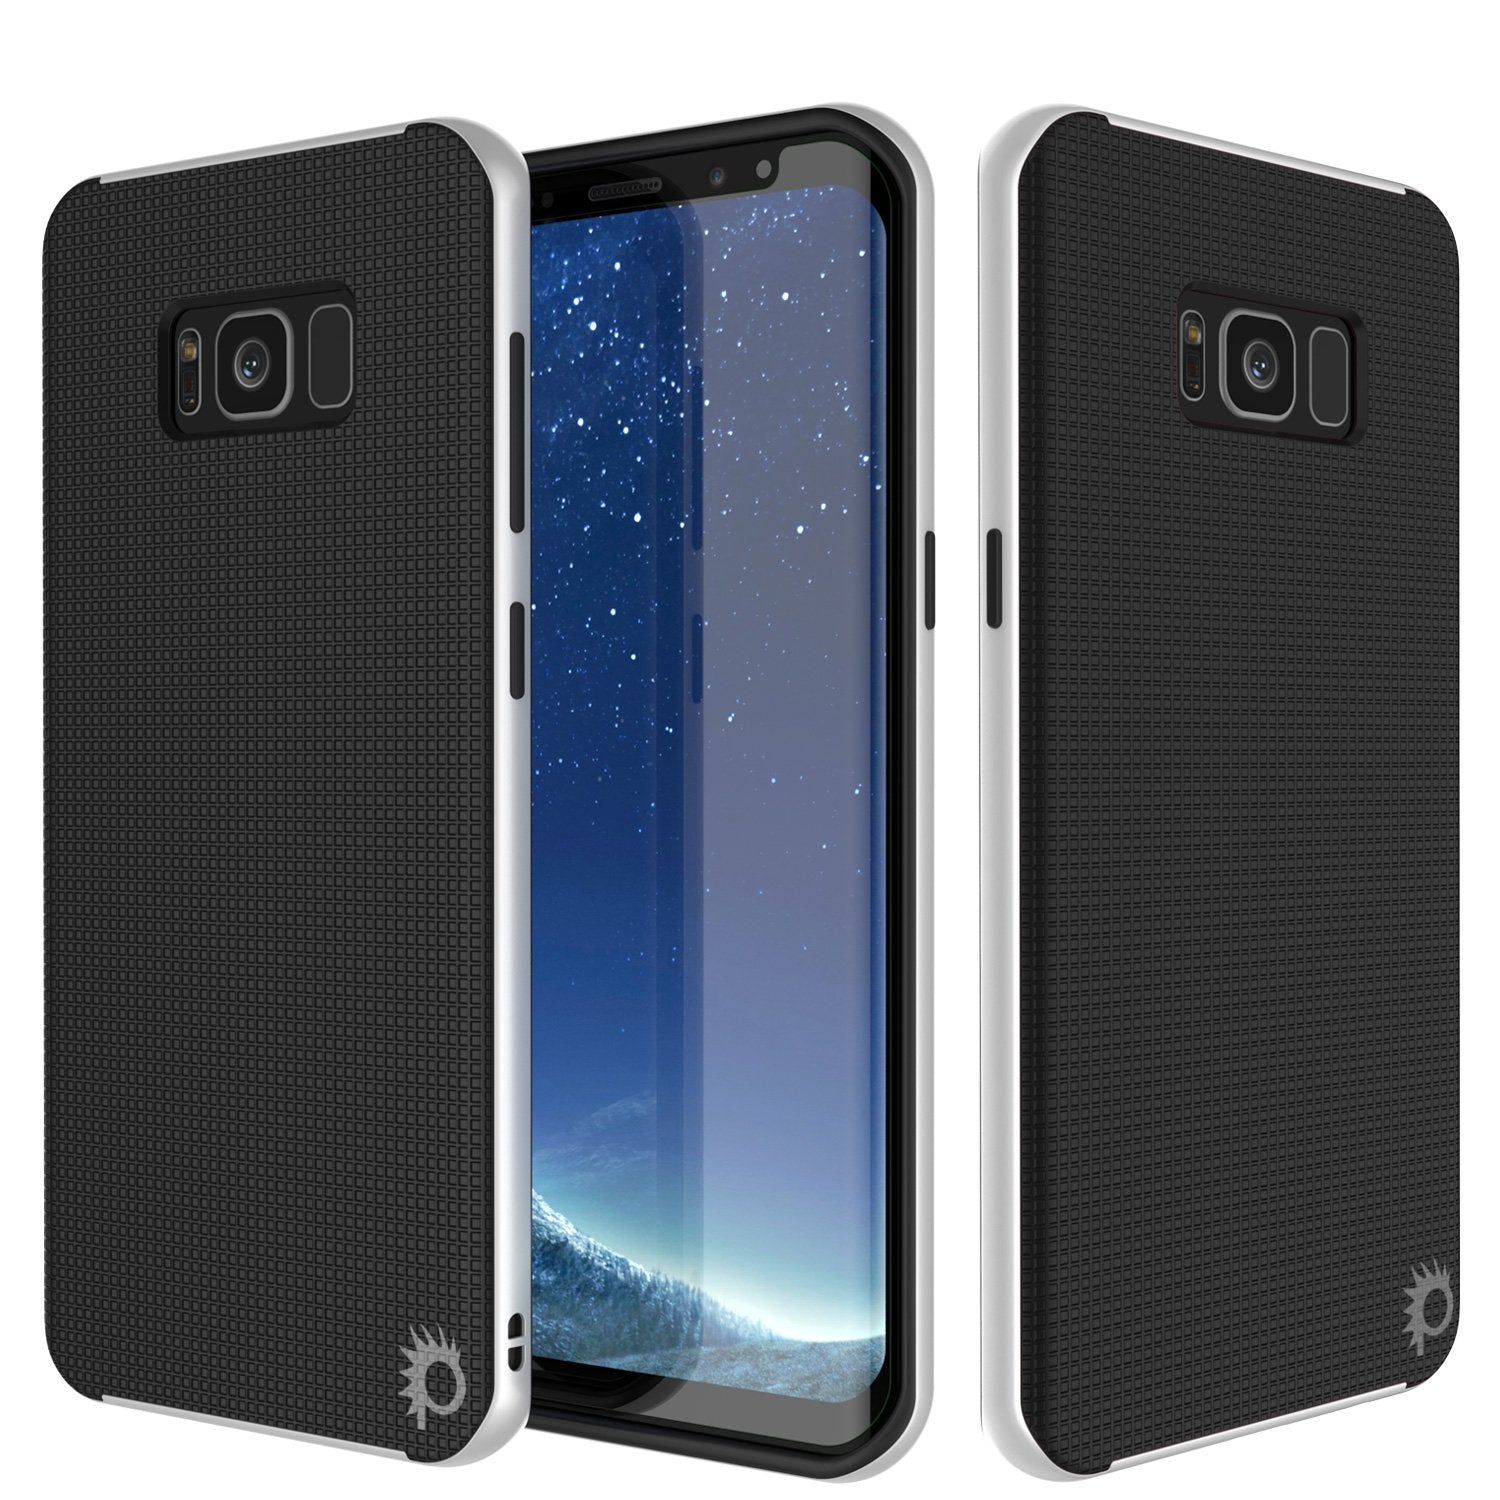 Galaxy S8 PLUS Case, PunkCase [Stealth Series] Hybrid 3-Piece Shockproof Dual Layer Cover [Non-Slip] [Soft TPU + PC Bumper] with PUNKSHIELD Screen Protector for Samsung S8+ [White]